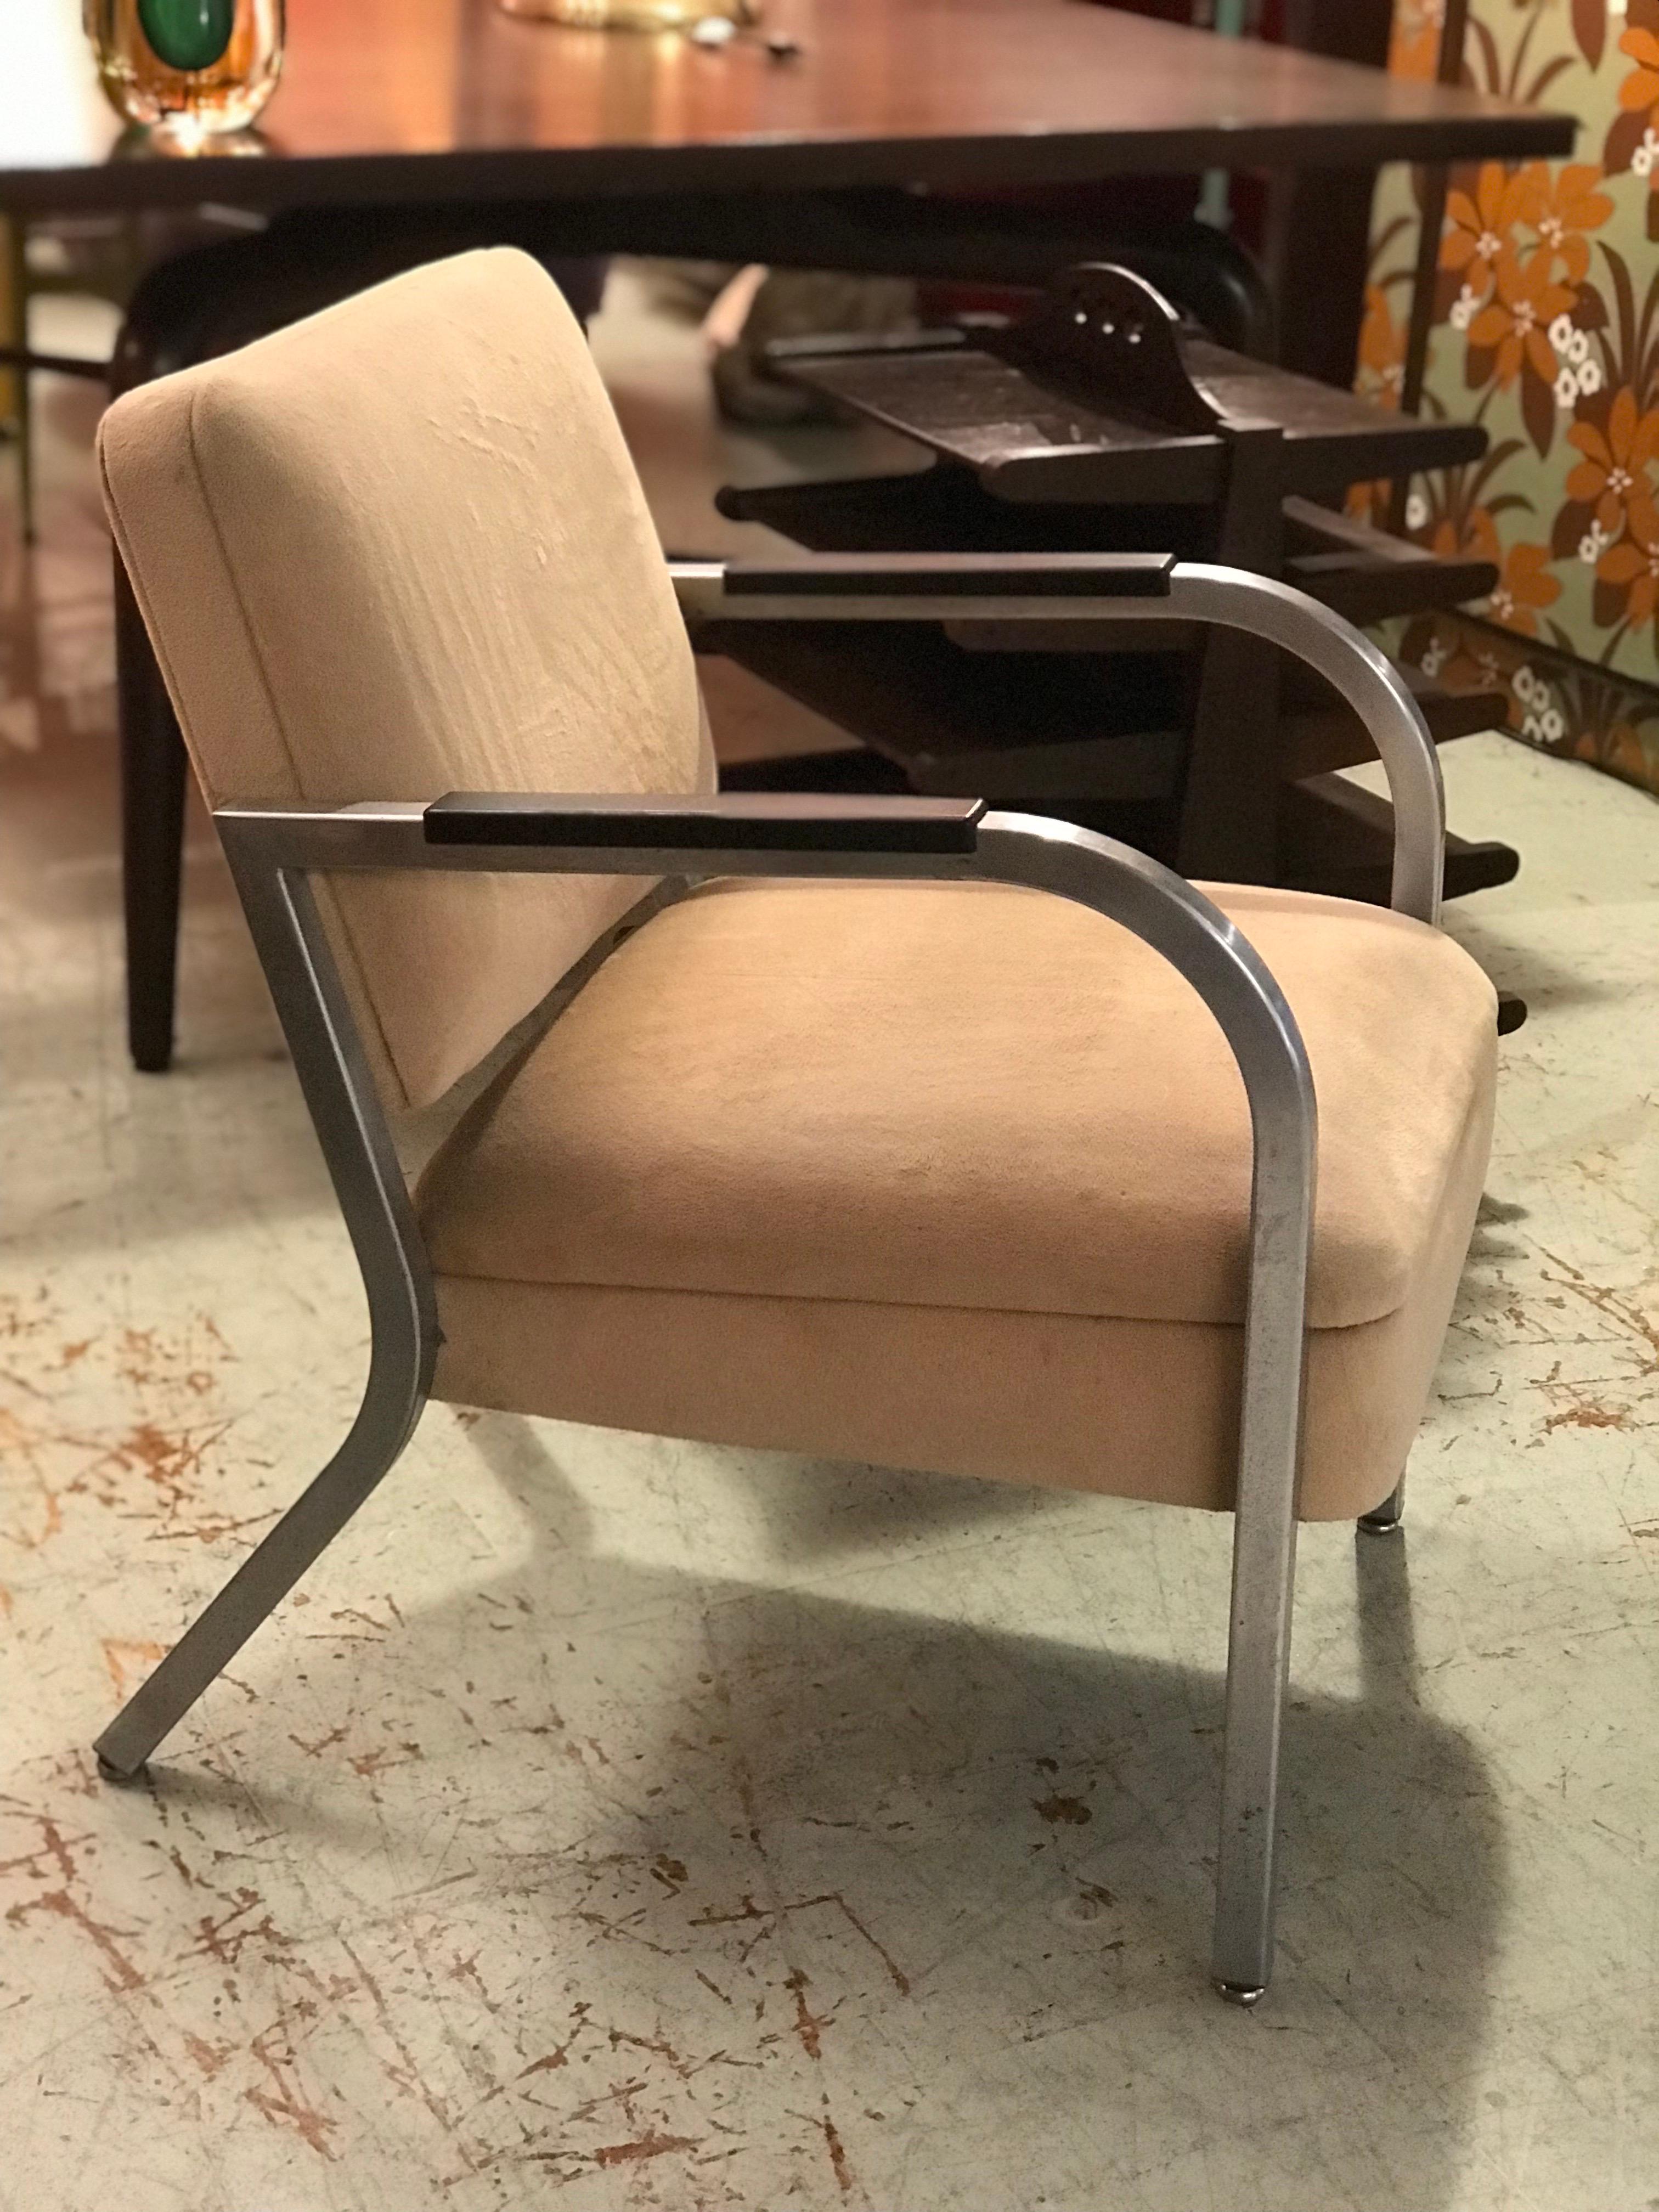 A Pair of Petite Square Tubing 1960's Club Chairs IMO Shaw Walker or Goodform,   1